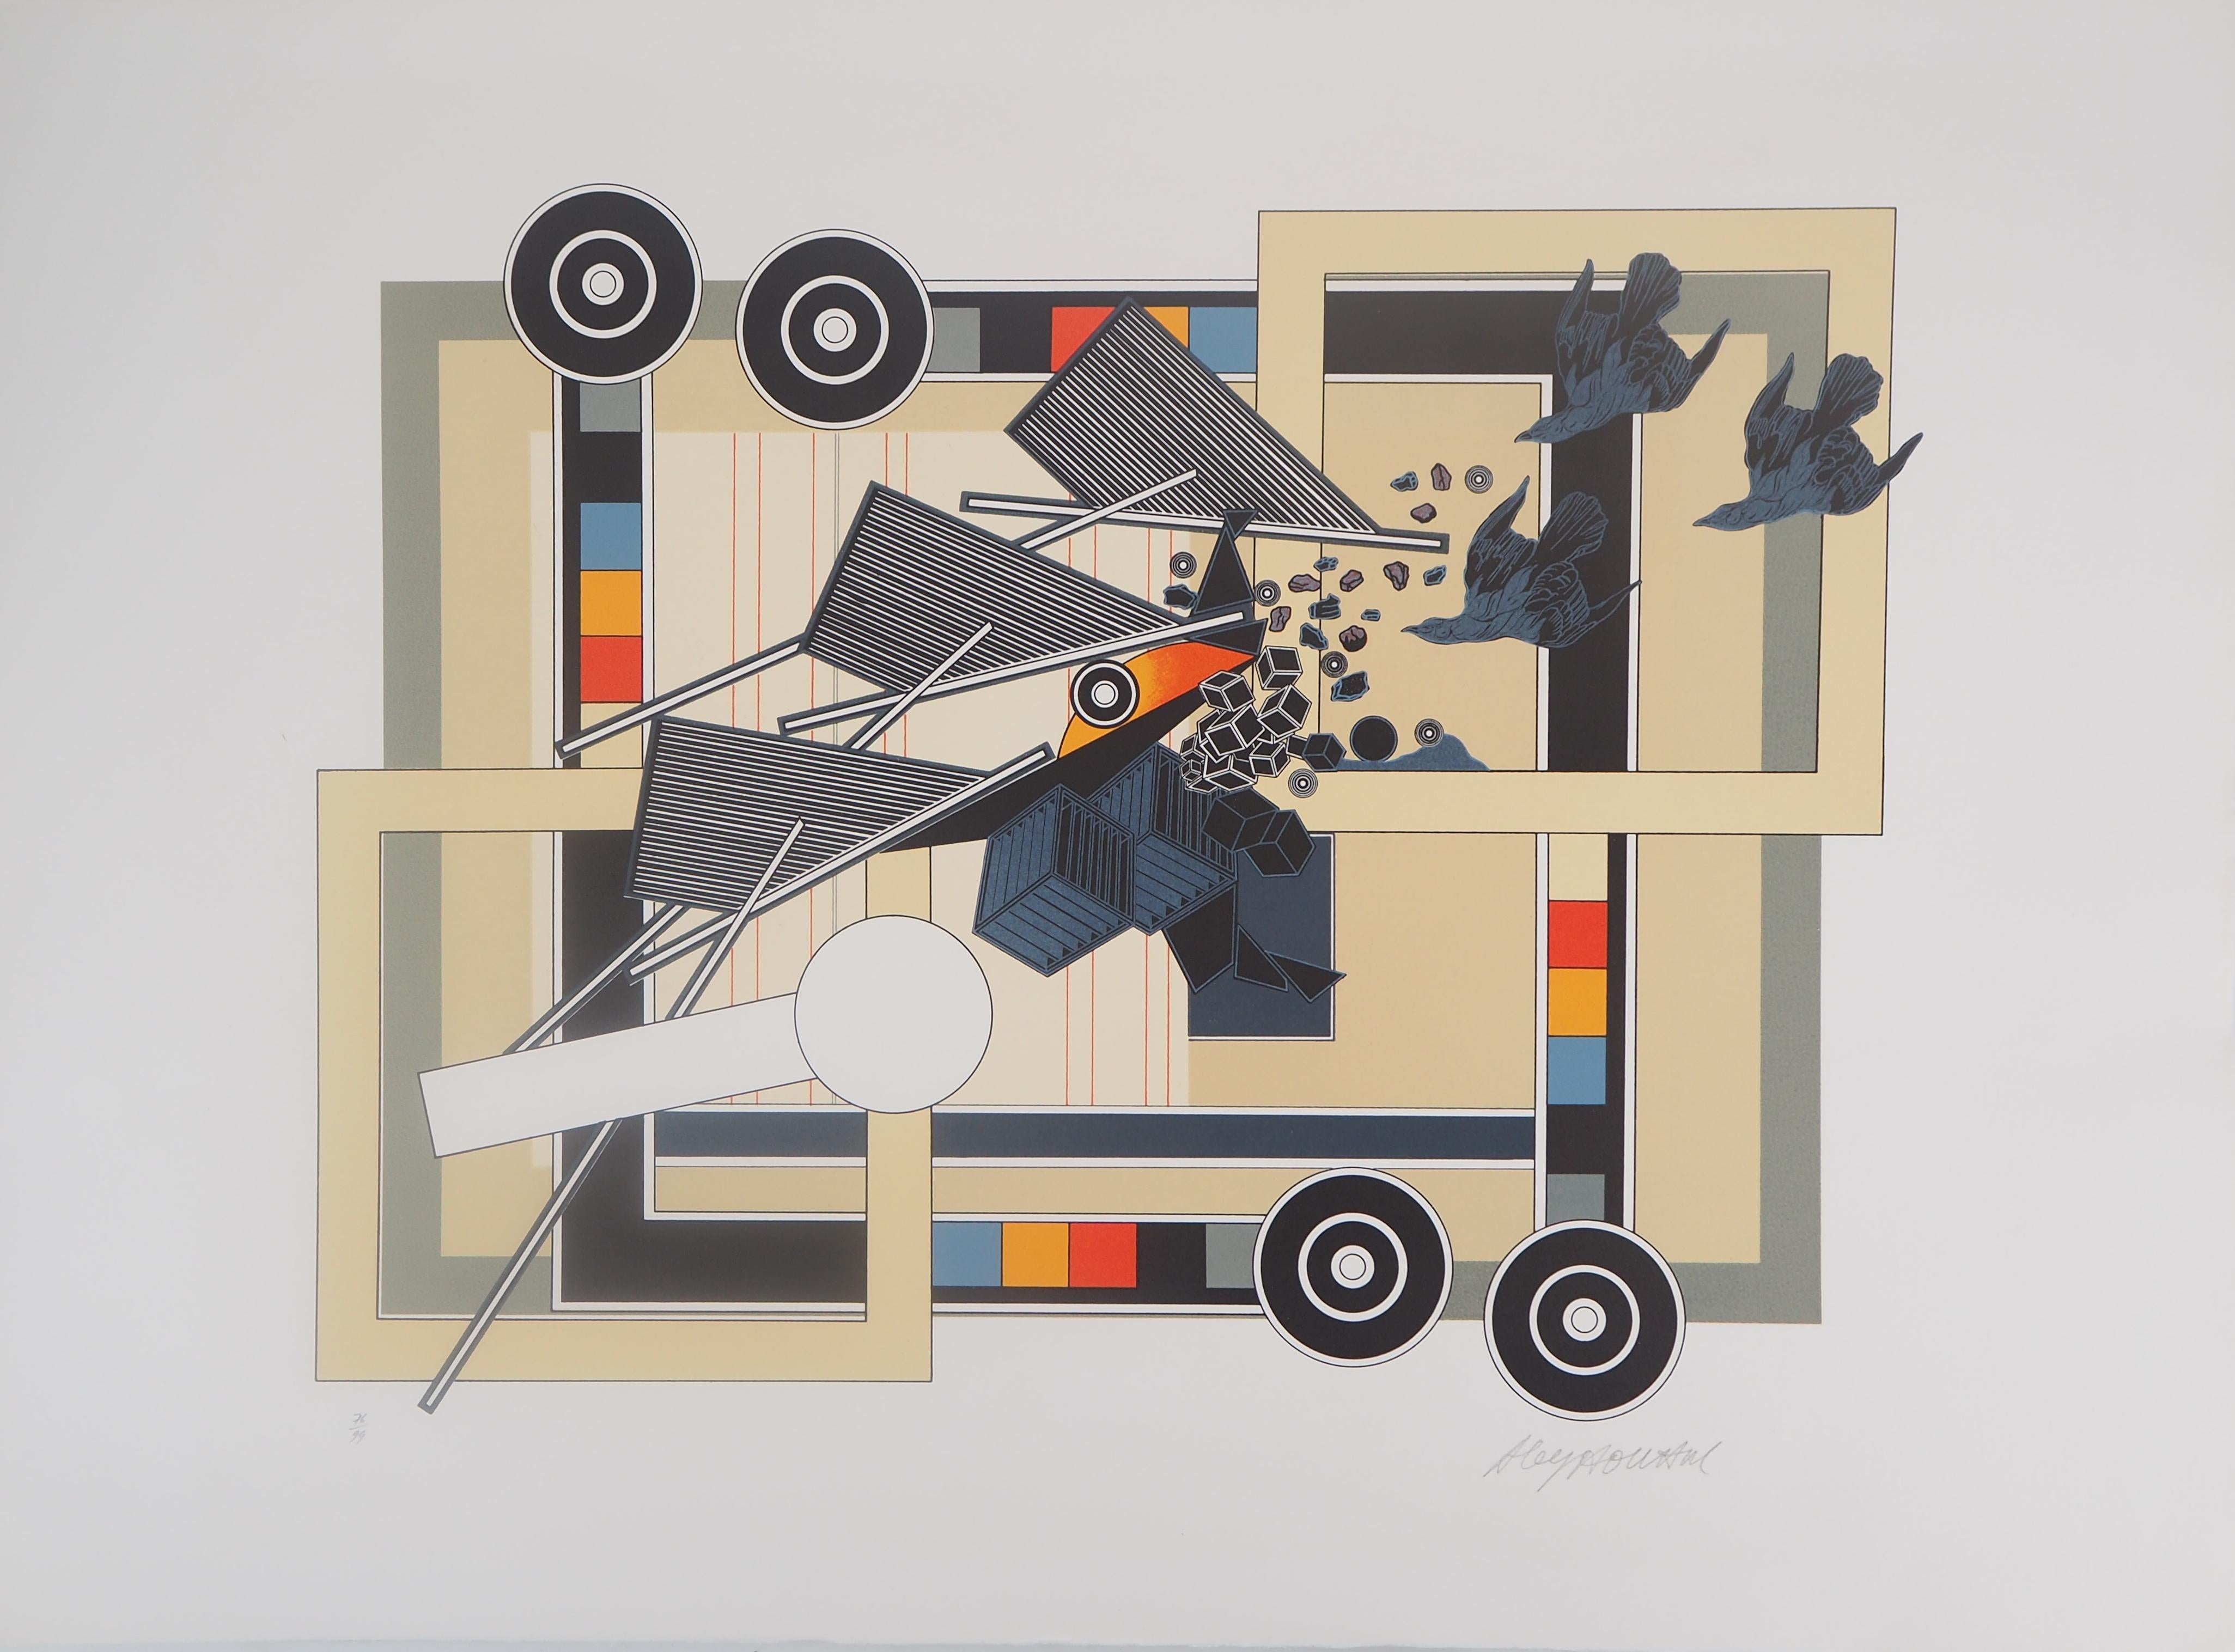 Alain Le Yaouanc Abstract Print - Tandem : Cinetic Compositon with Birds - Handsigned Original Lithograph